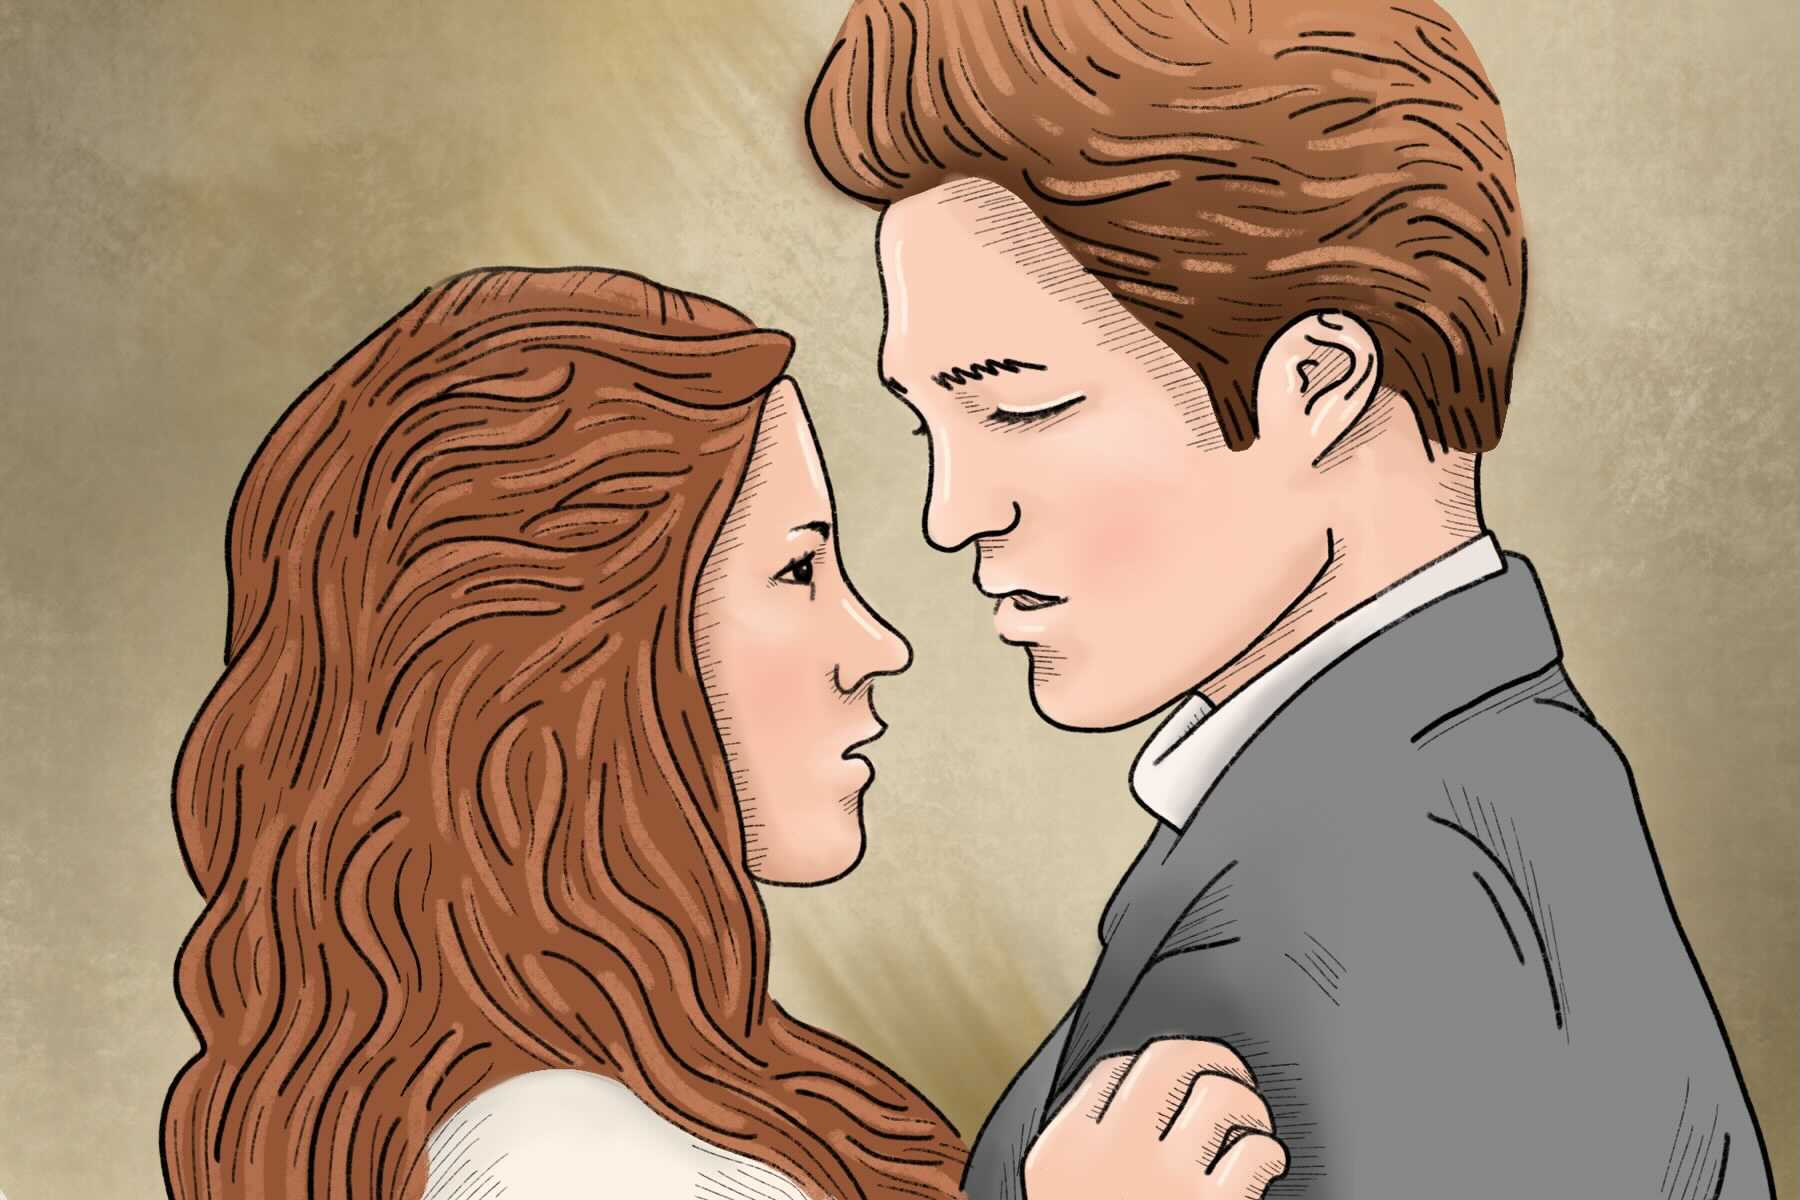 Twilight lead characters share a romantic embrace.Bella and Edward